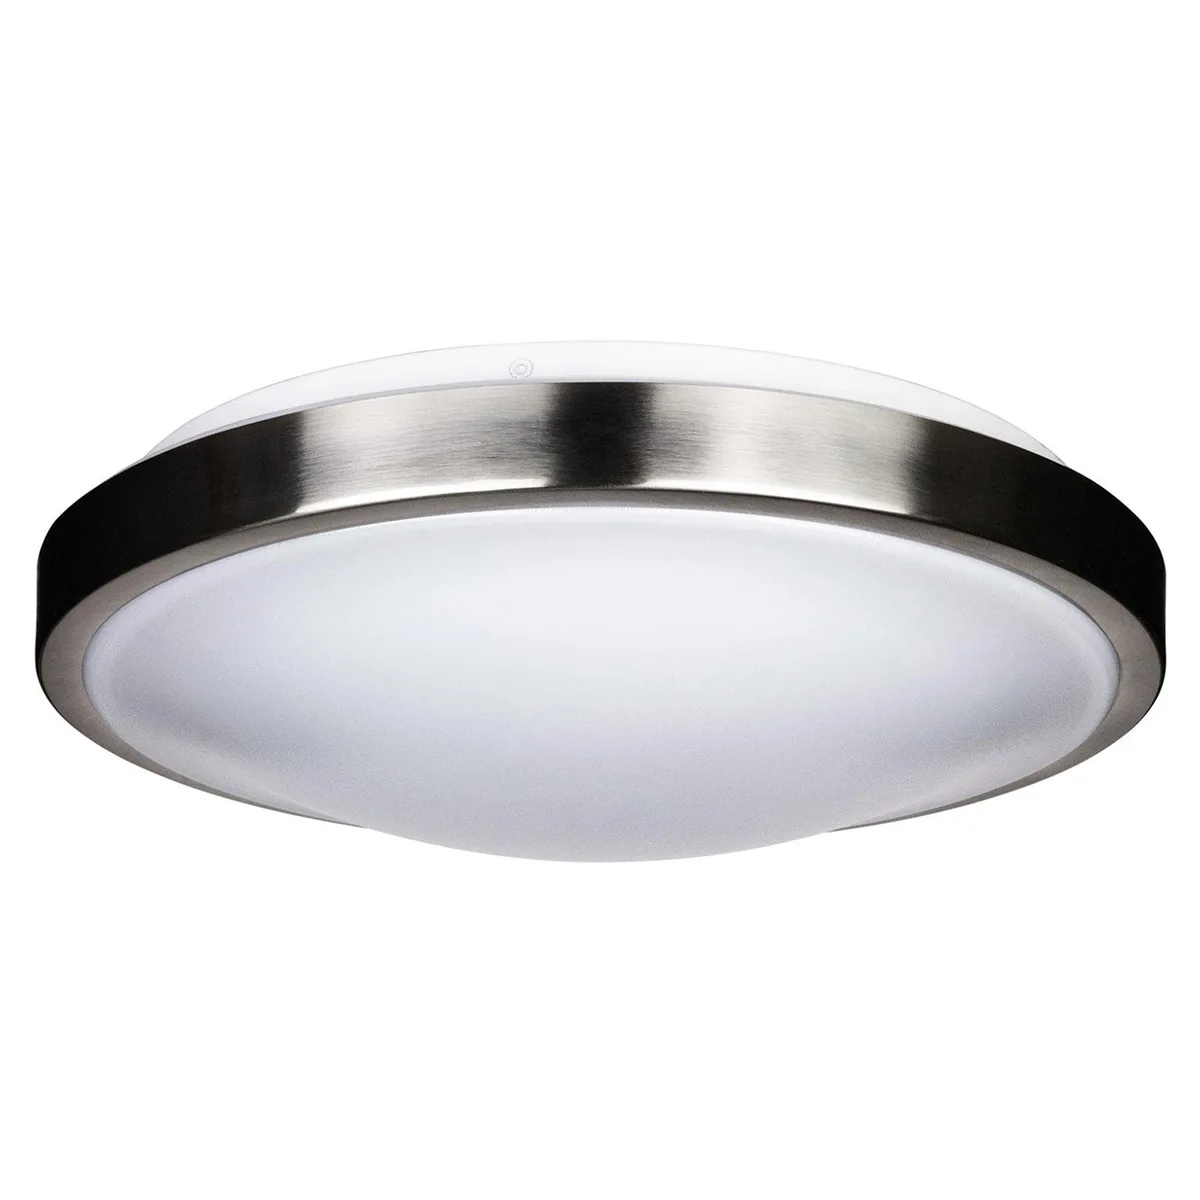 40K - Cool White Sunlite LED Ceiling Light Fixture with Brushed Nickel Trim, 15 Watts, Dimmable, 12-Inch